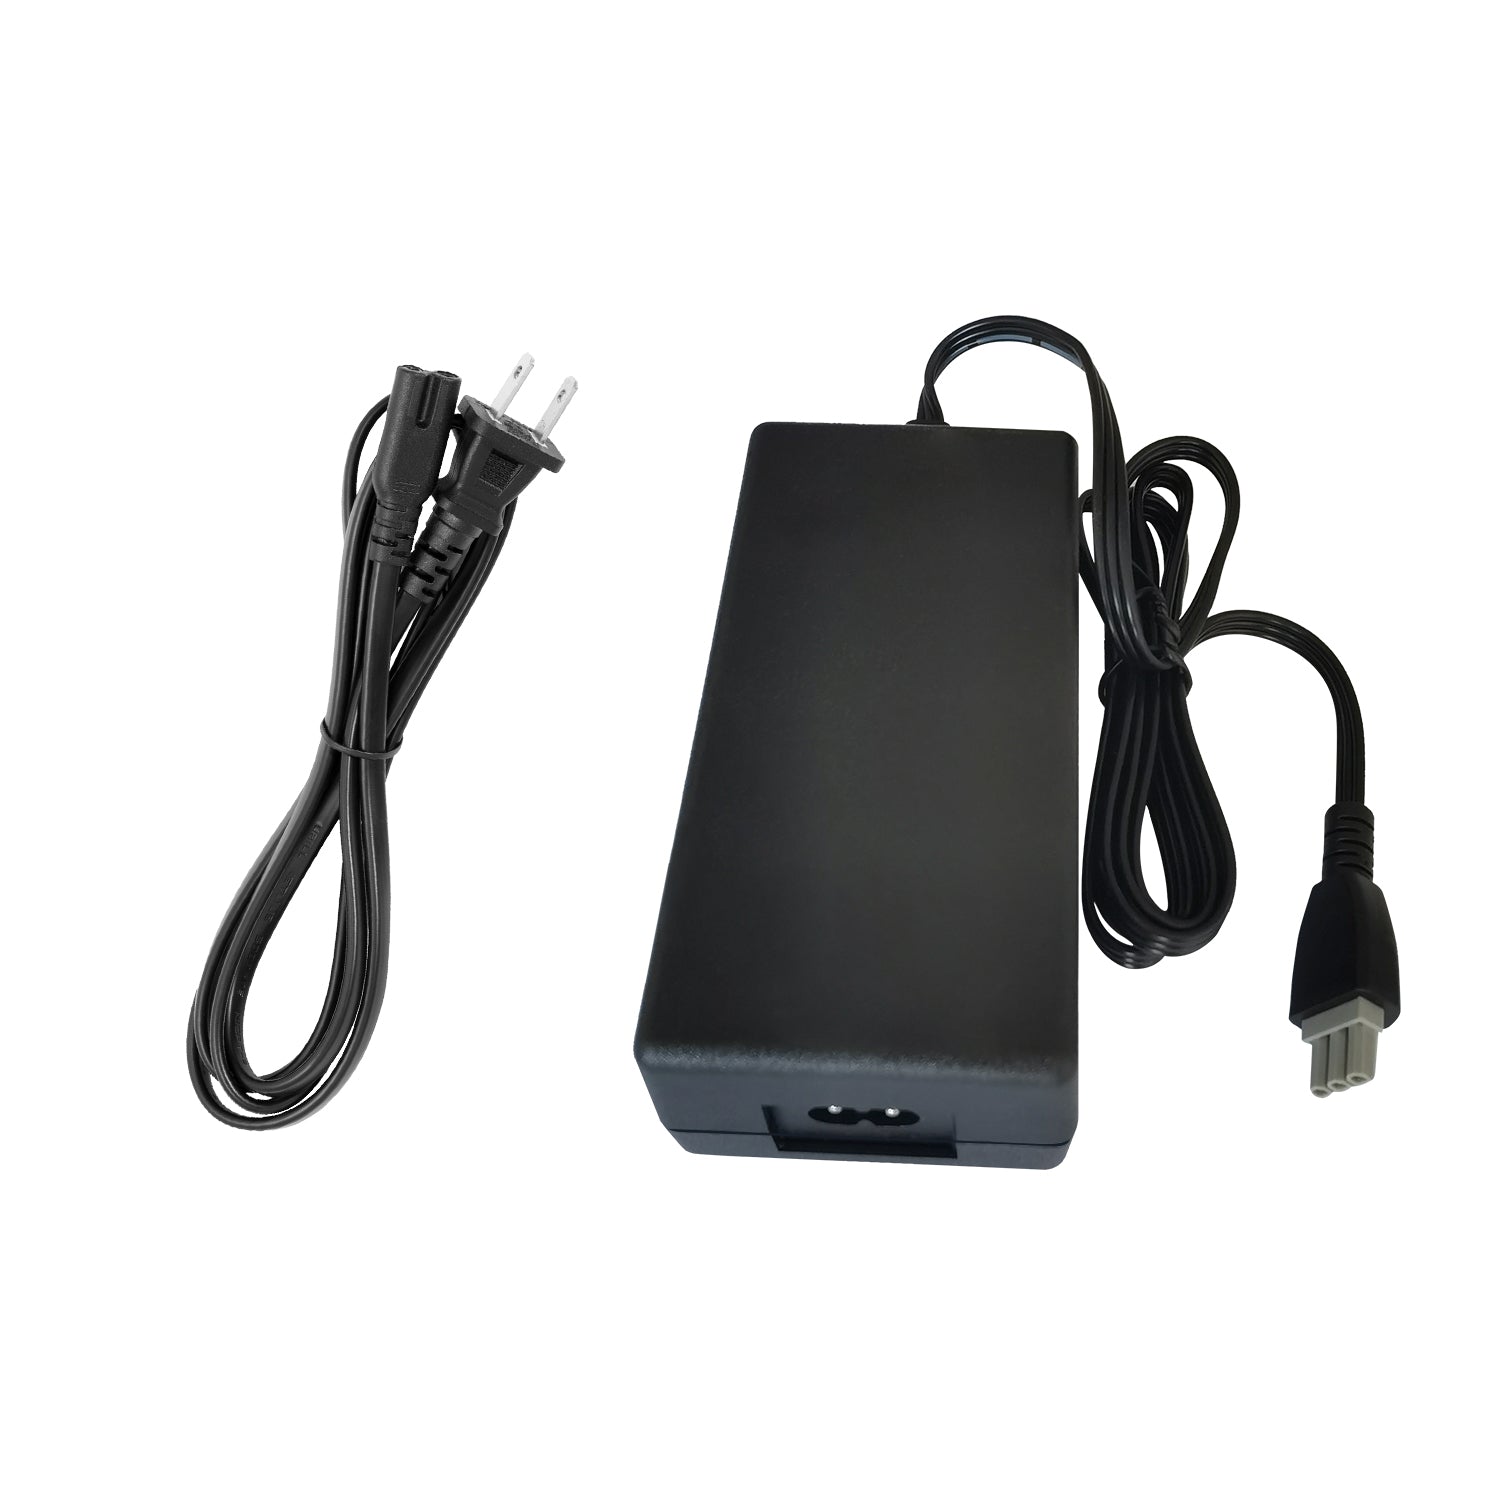 Power Adapter for HP Officejet J5780 All-in-One Printer.